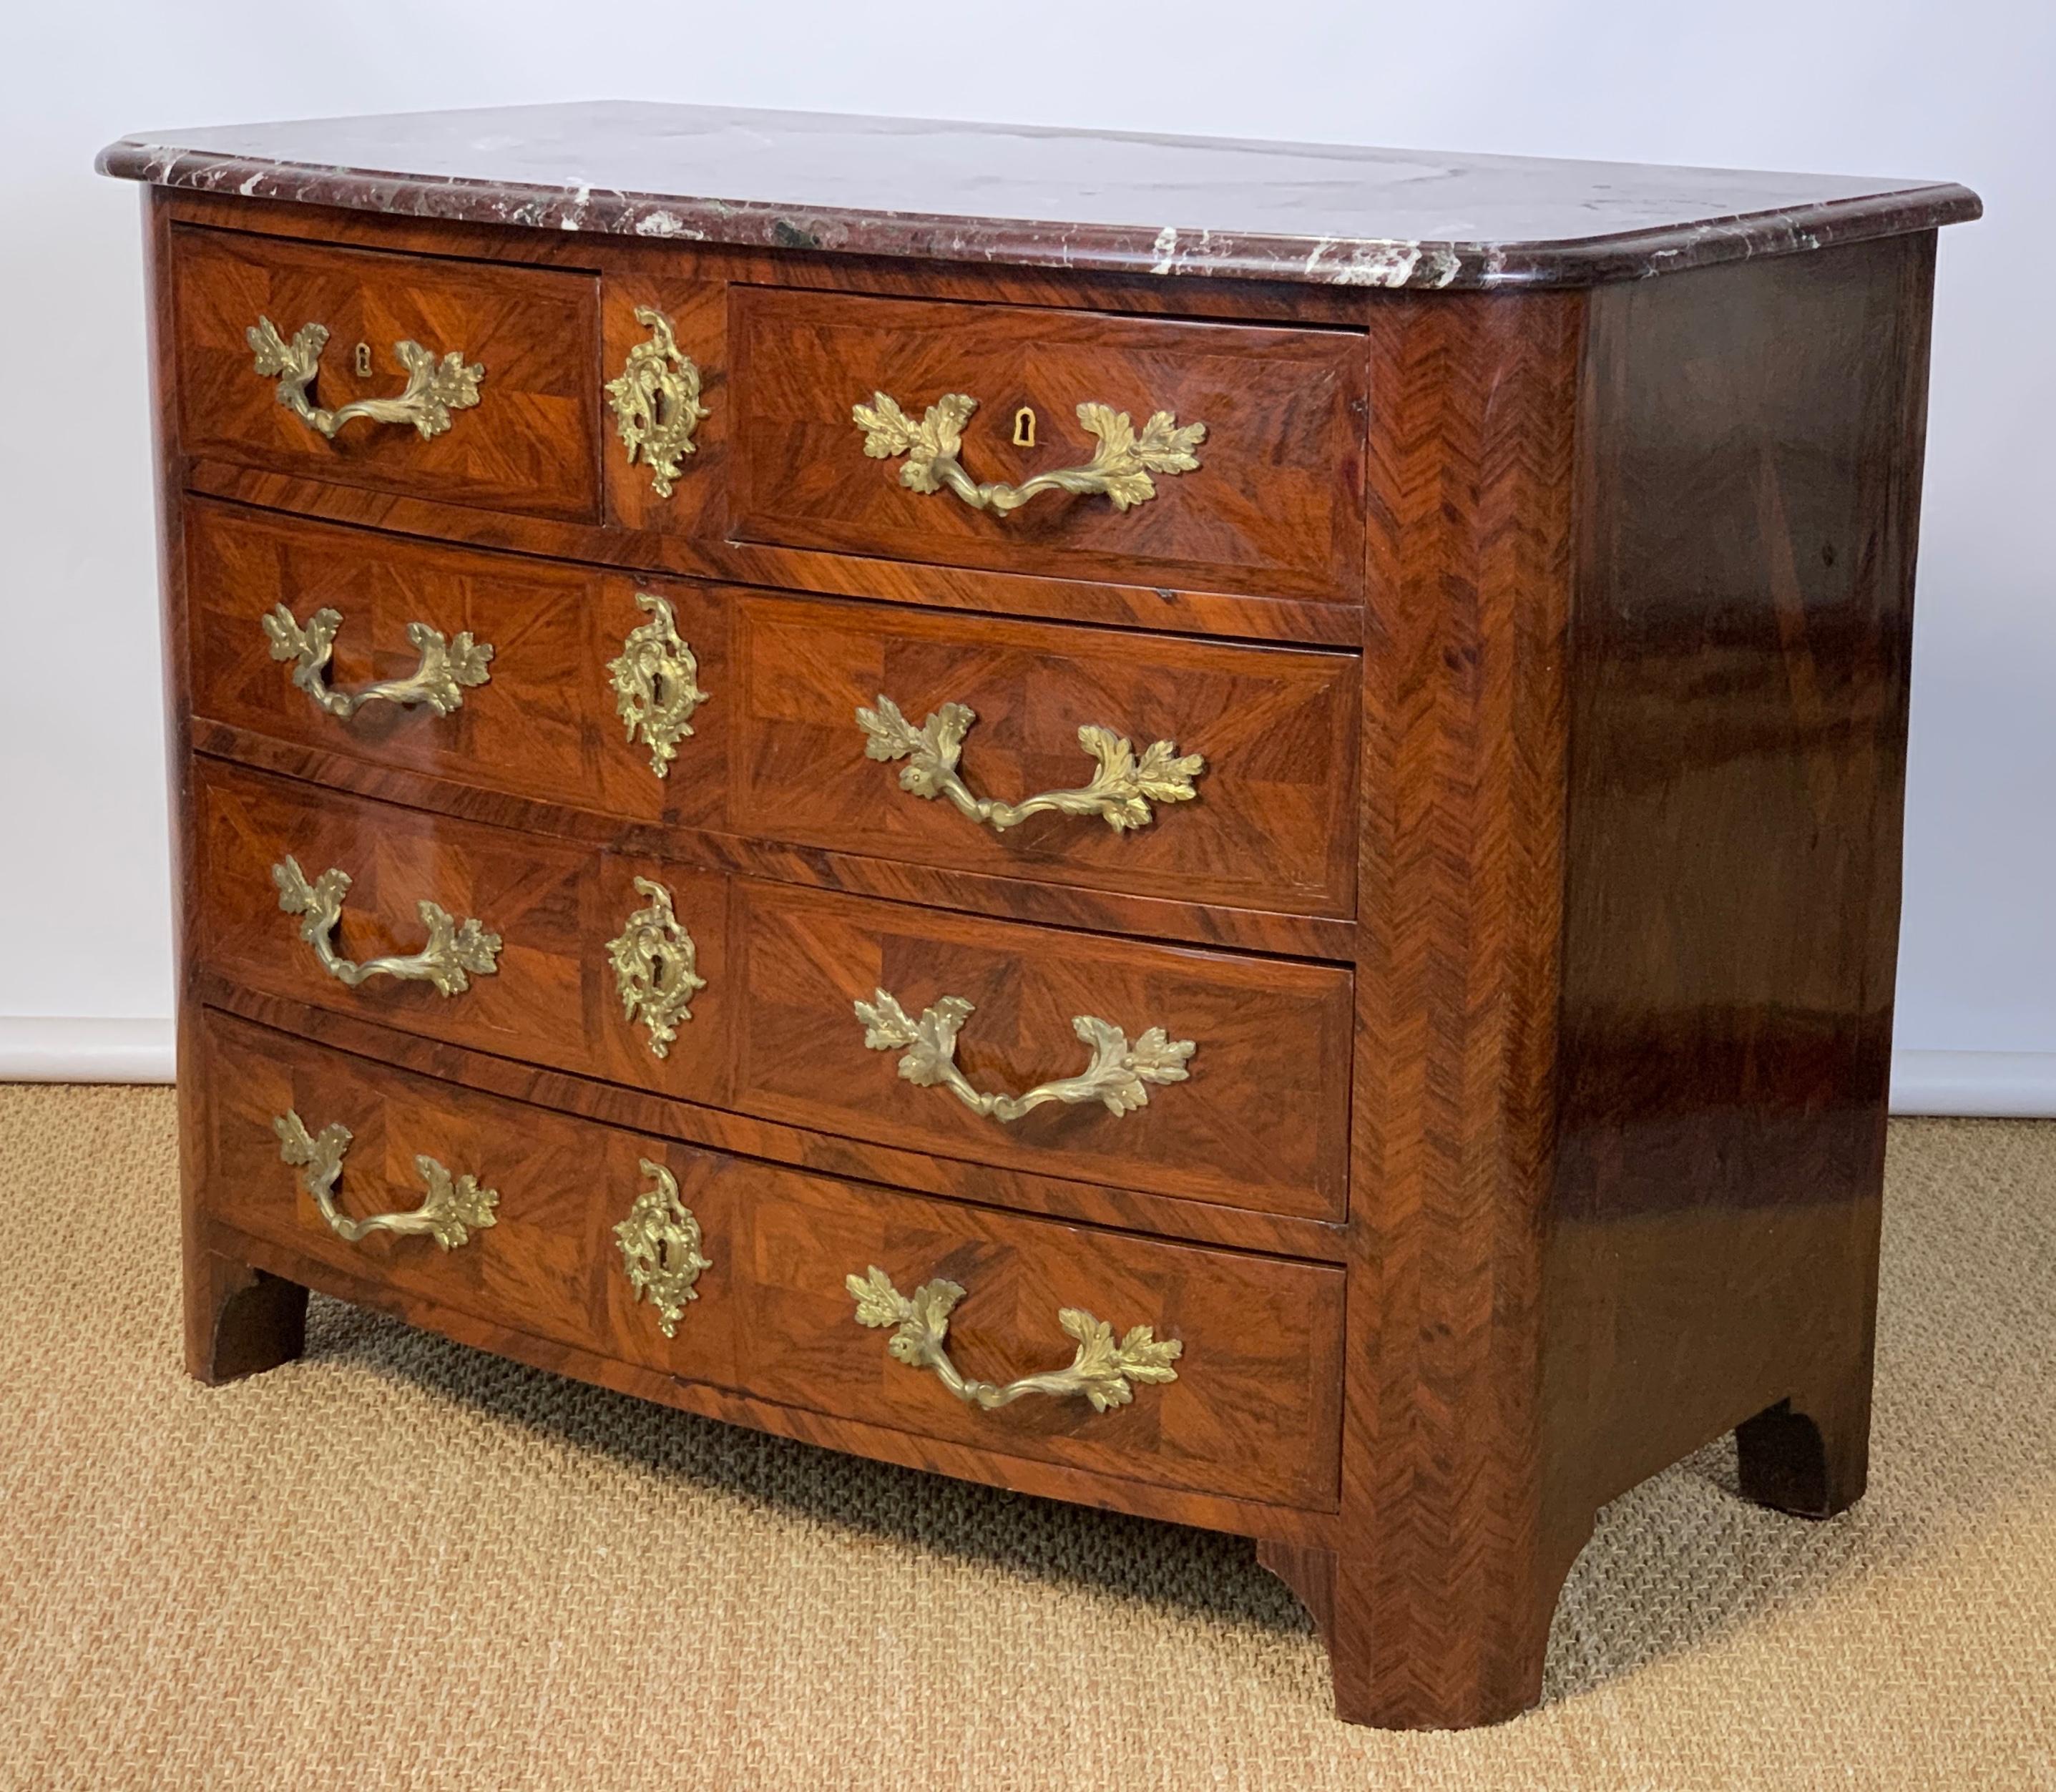 An elegant late 19th century French 5-drawer bow front commode in the Louis XV style featuring parquetry inlaid kingwood sides and front and elaborate gilt metal mounts with beautiful deep rose colored marble top.